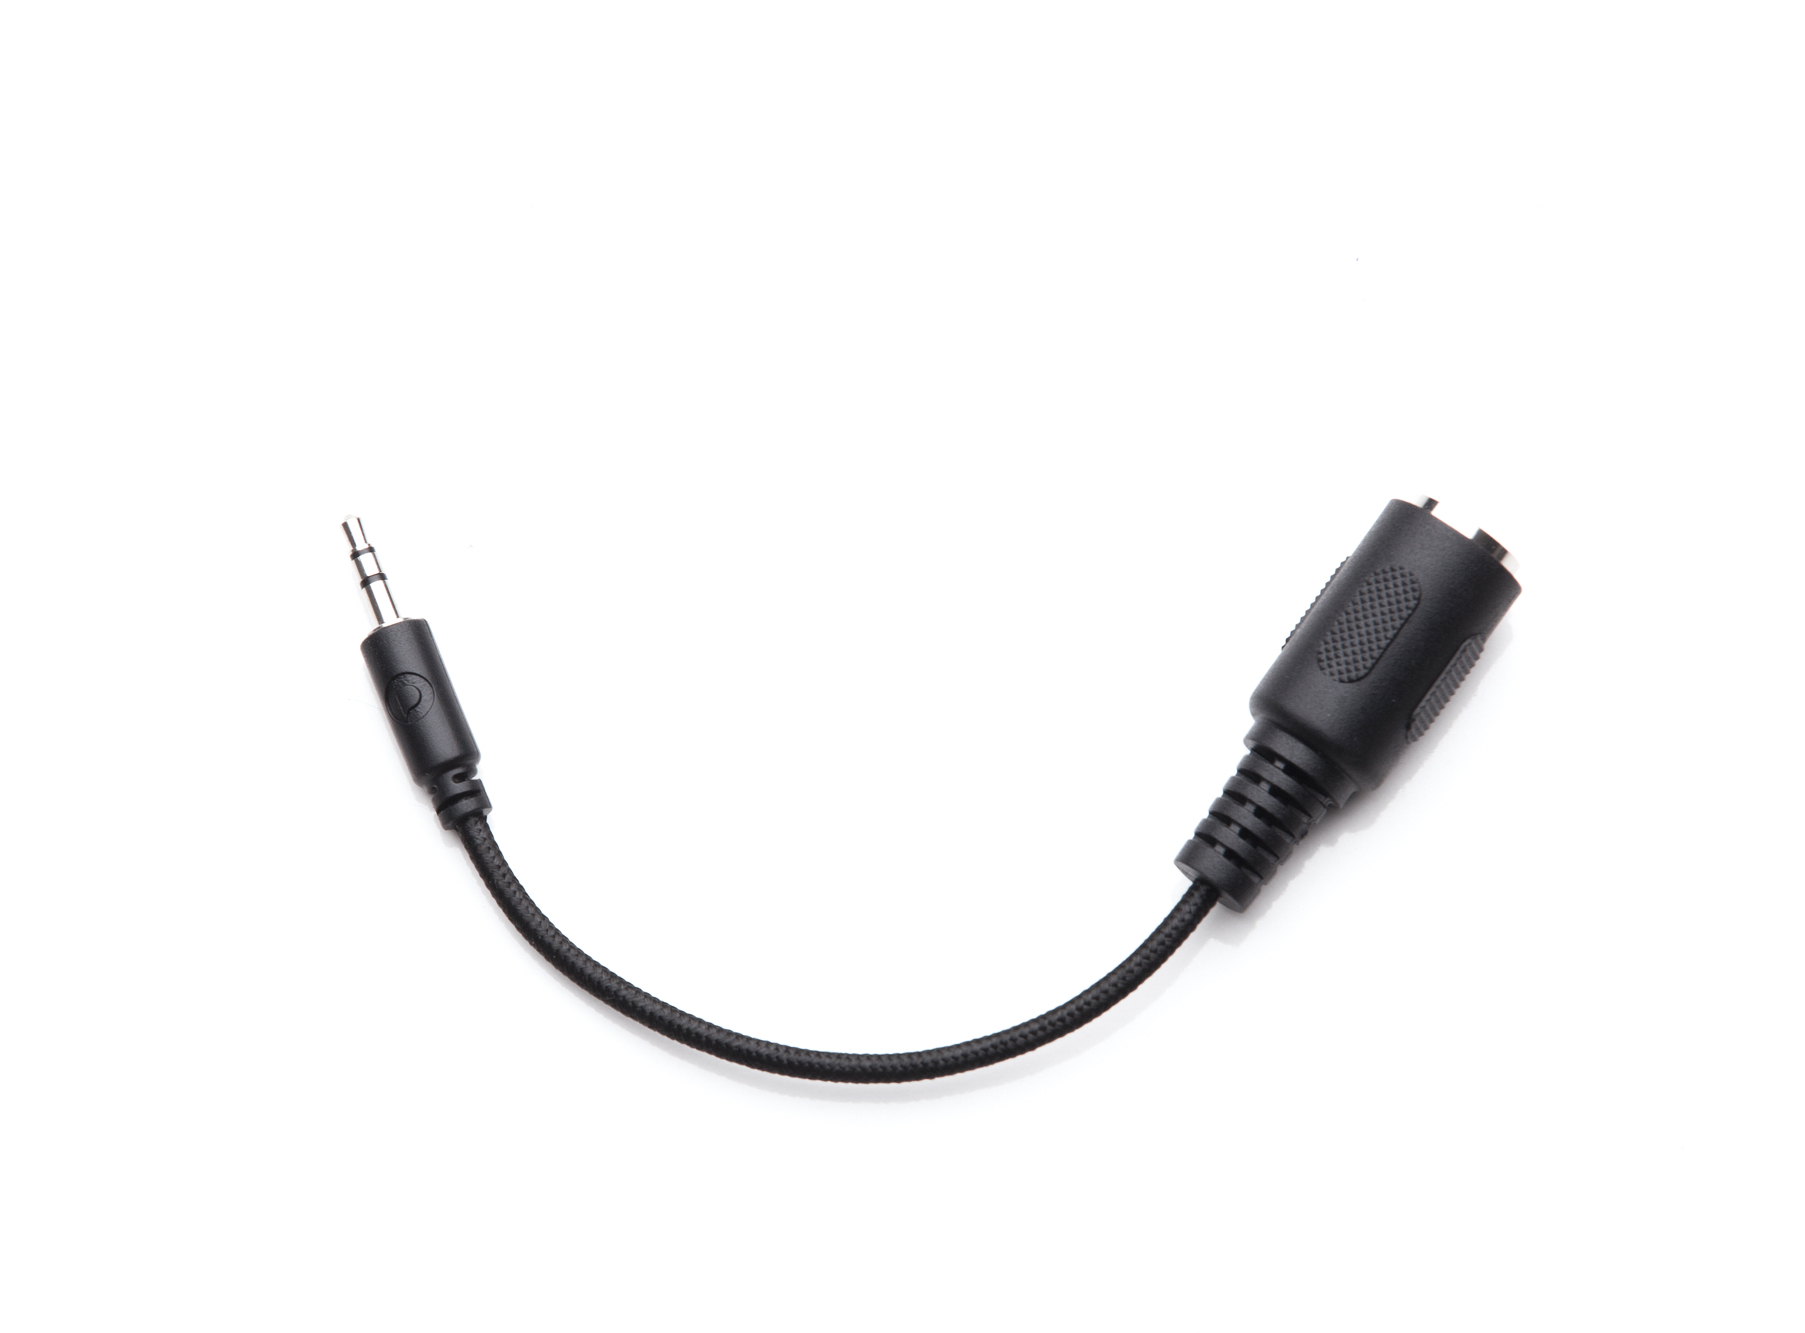 MIDI Jack to DIN Adapter